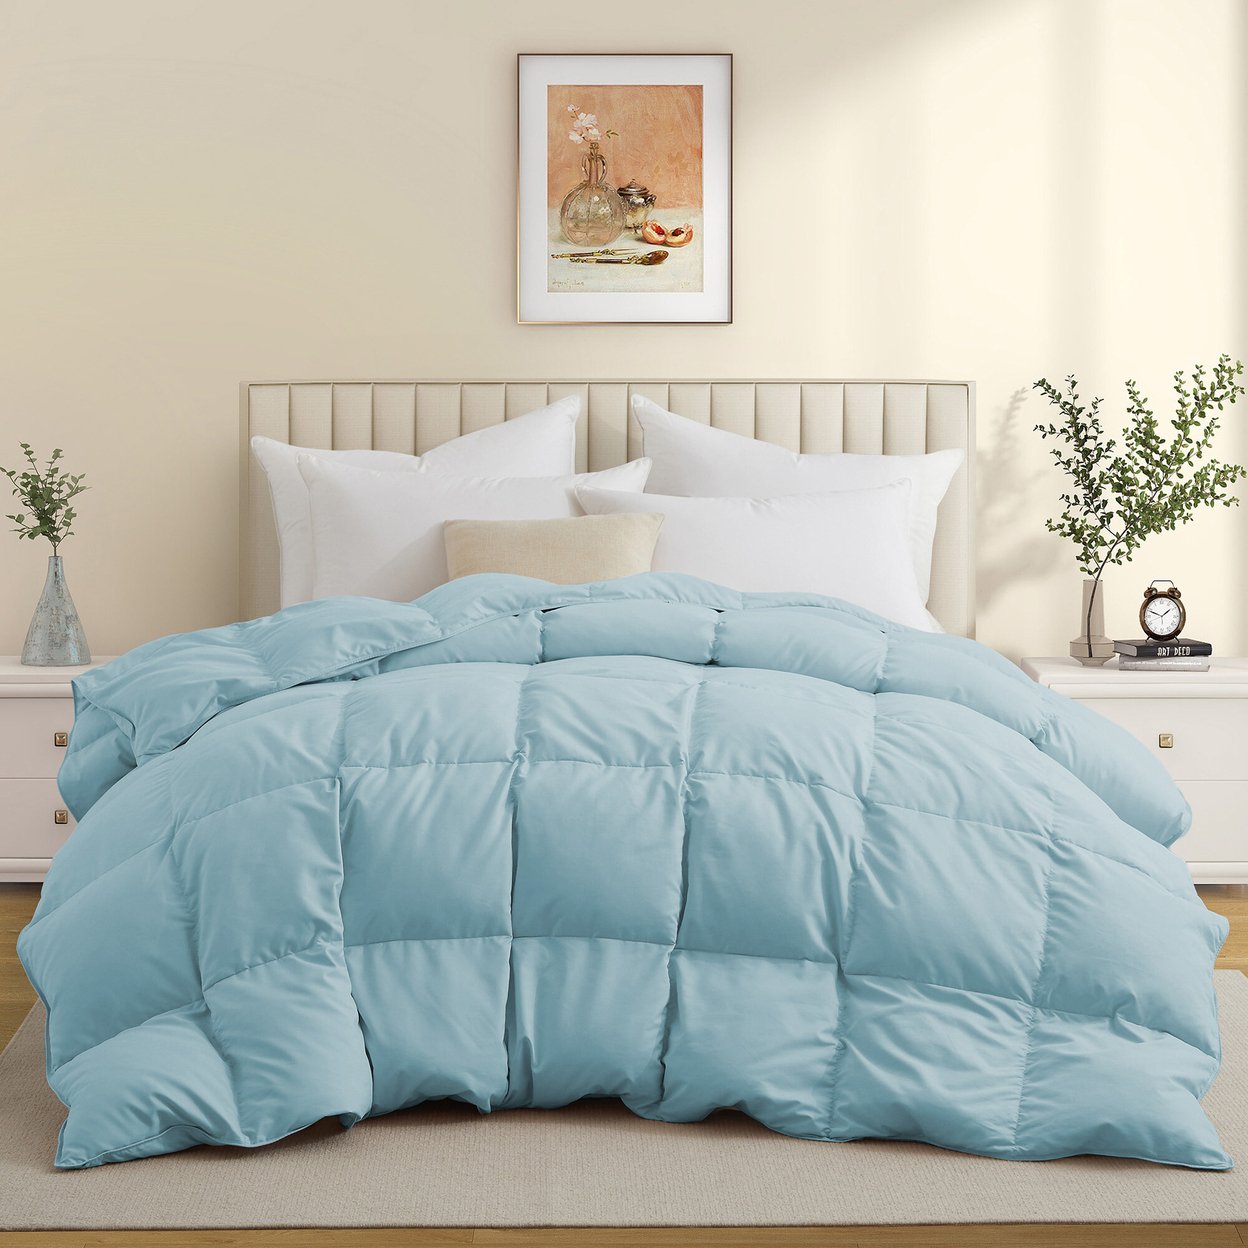 Premium All Seasons White Goose Feather Fiber And Down Comforter - Winter Sky, Full/Queen